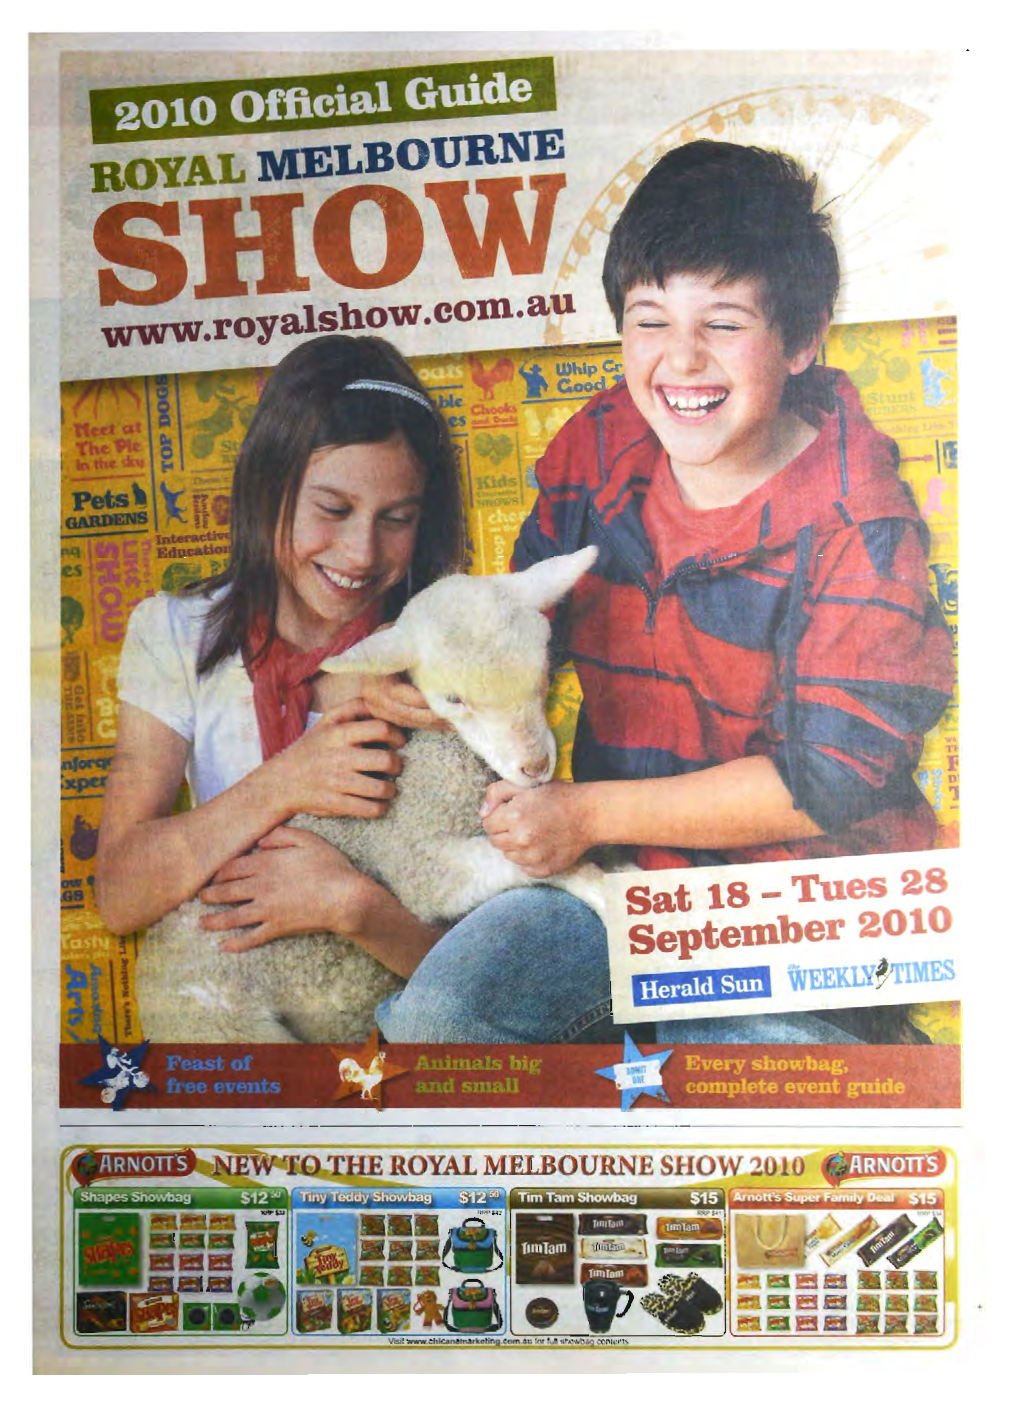 Show Guide 2010 * Herald Sun Fun for Everyone from Previous Page